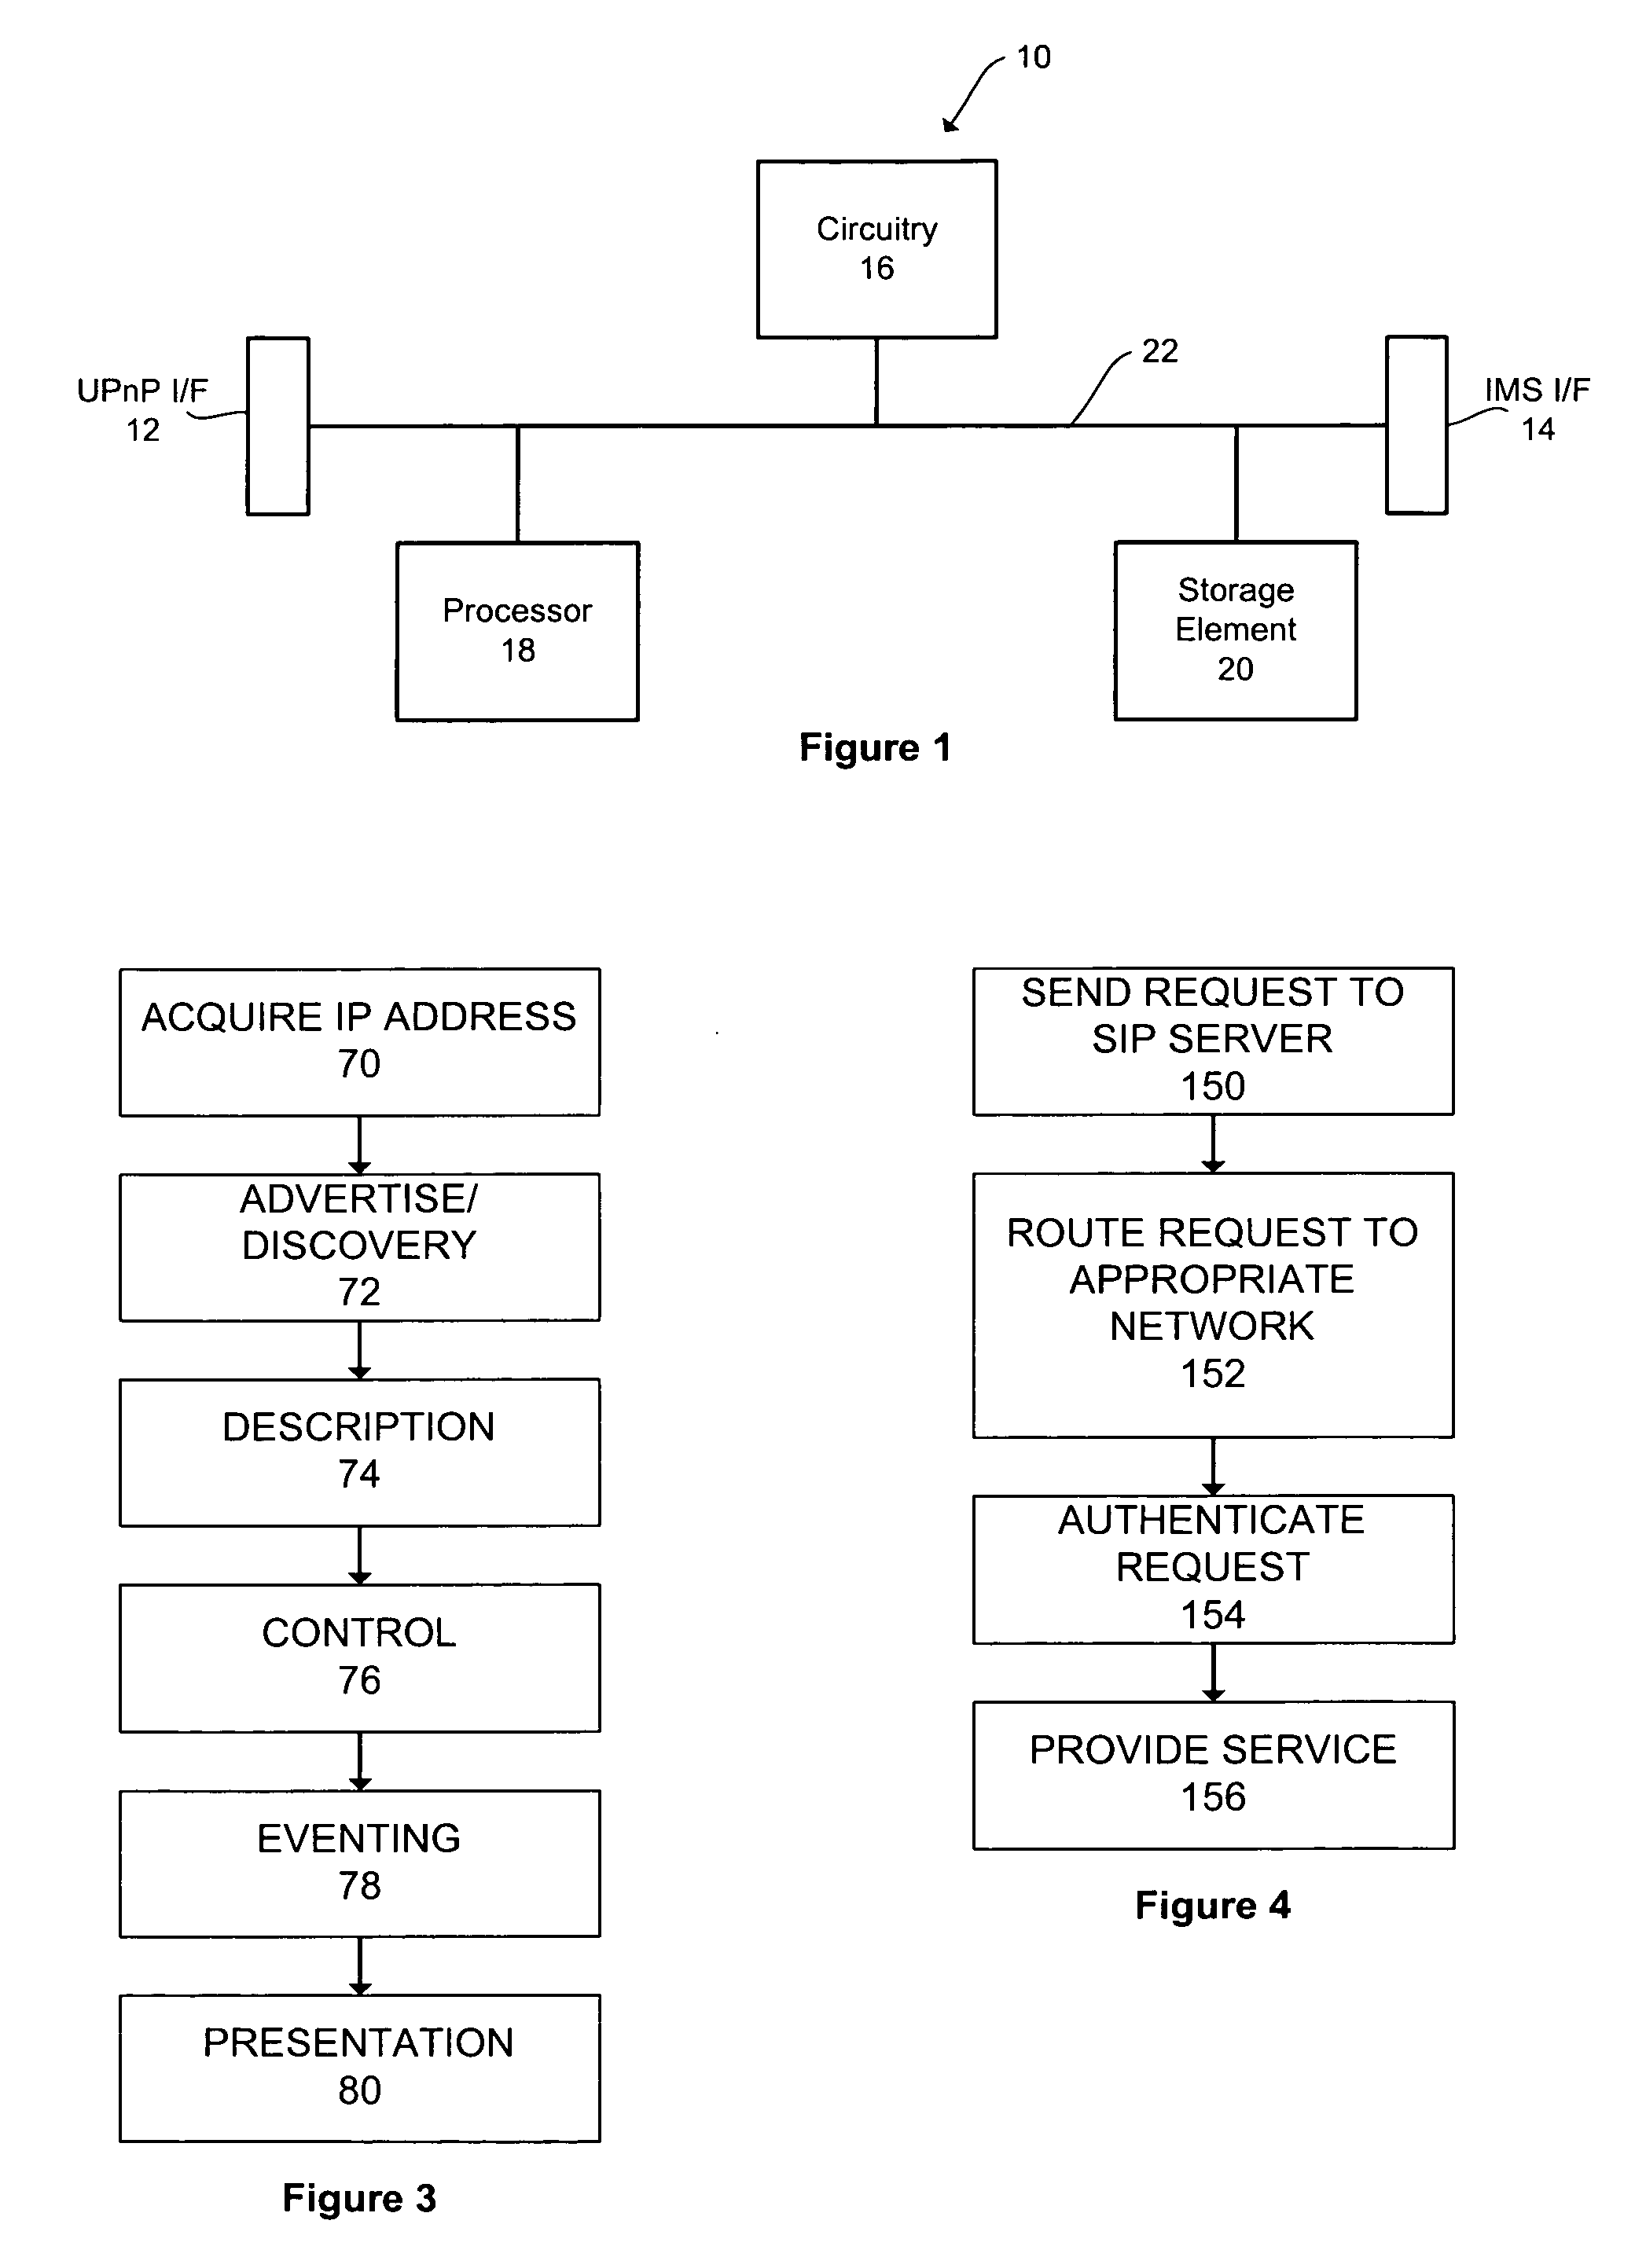 Communication network device for universal plug and play and Internet multimedia subsystems networks